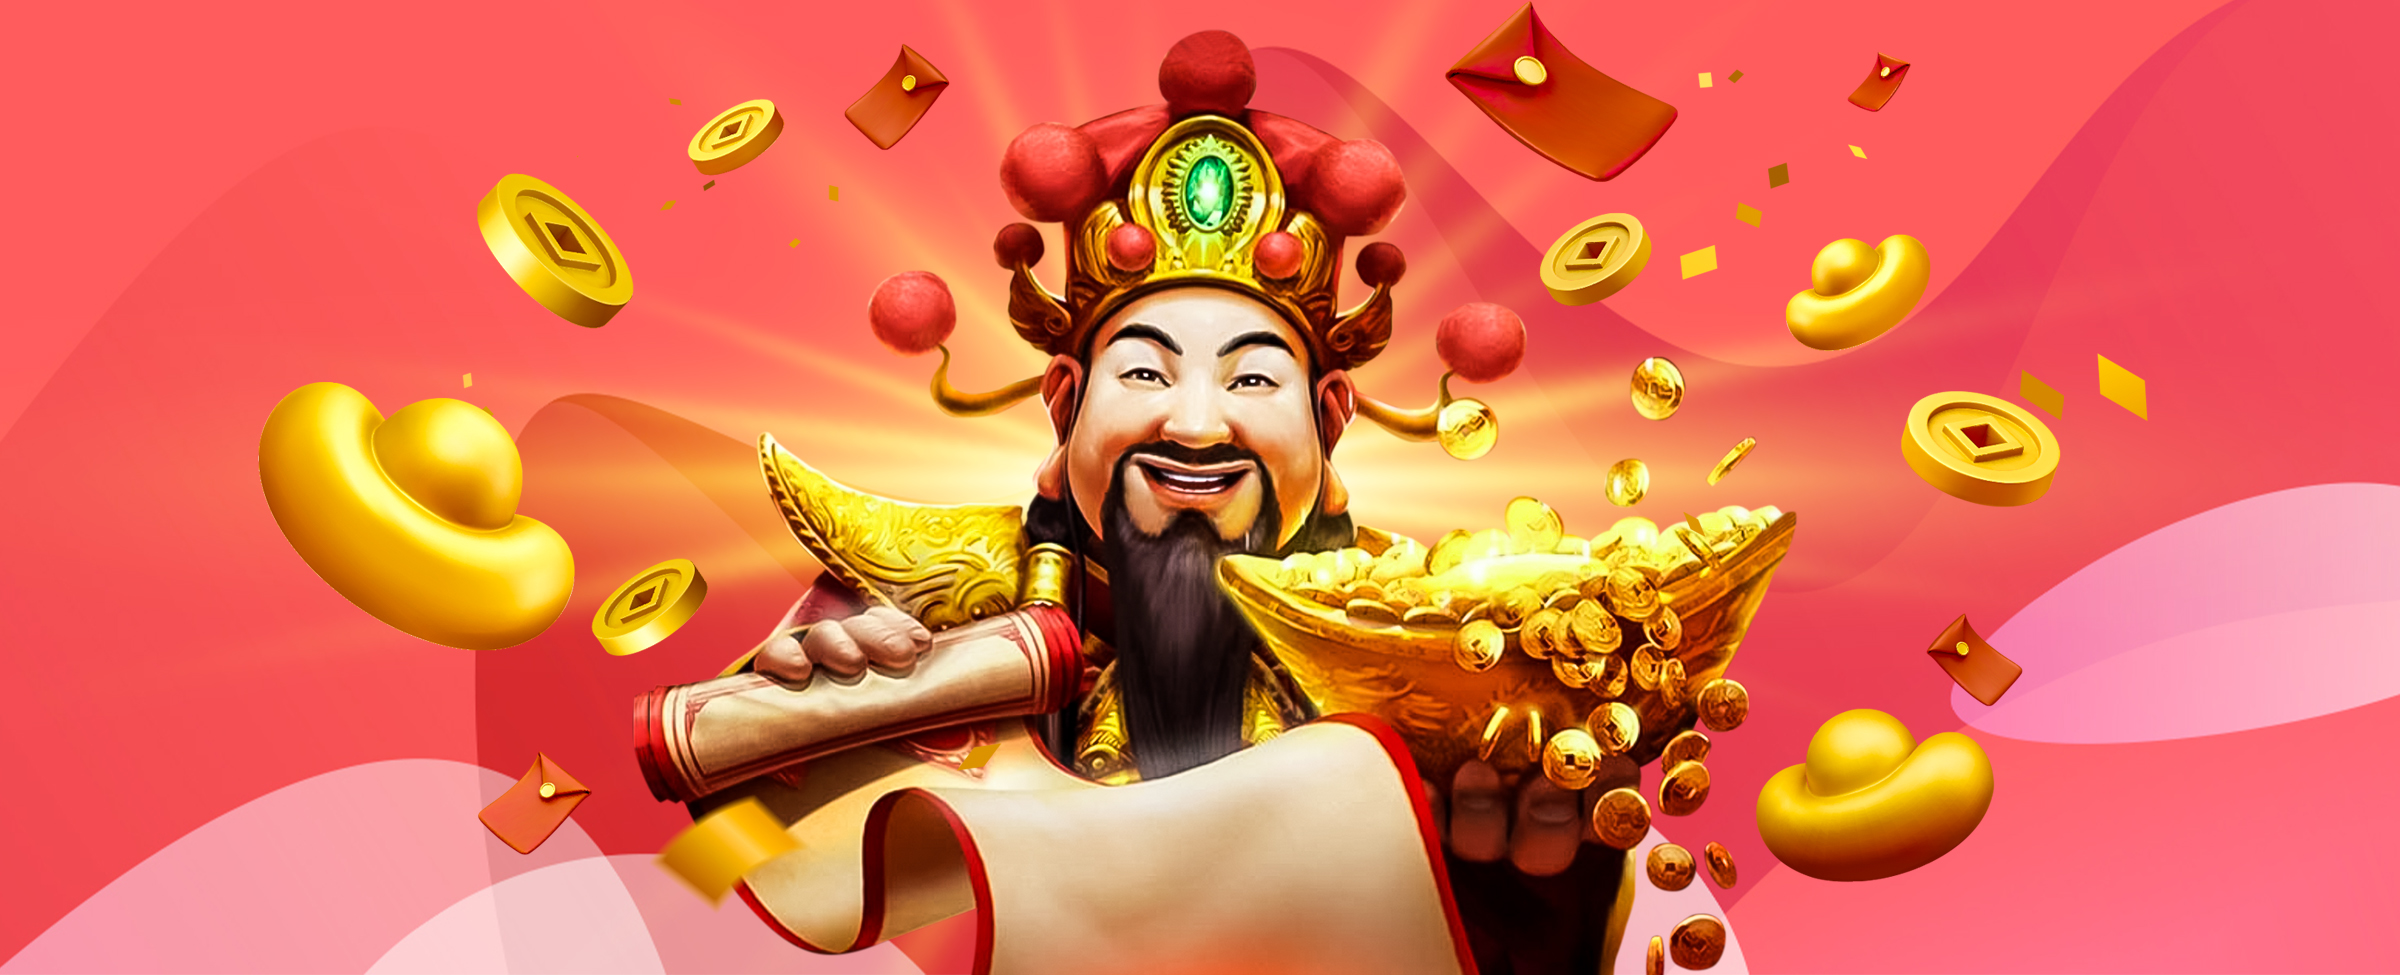 The central 3D-animated character from the SlotsLV slot game Gongxi Facai is pictured, holding a scroll in one hand, and a bowl of gold in the other. Surrounding him are flying coins, red envelopes and other artifacts.